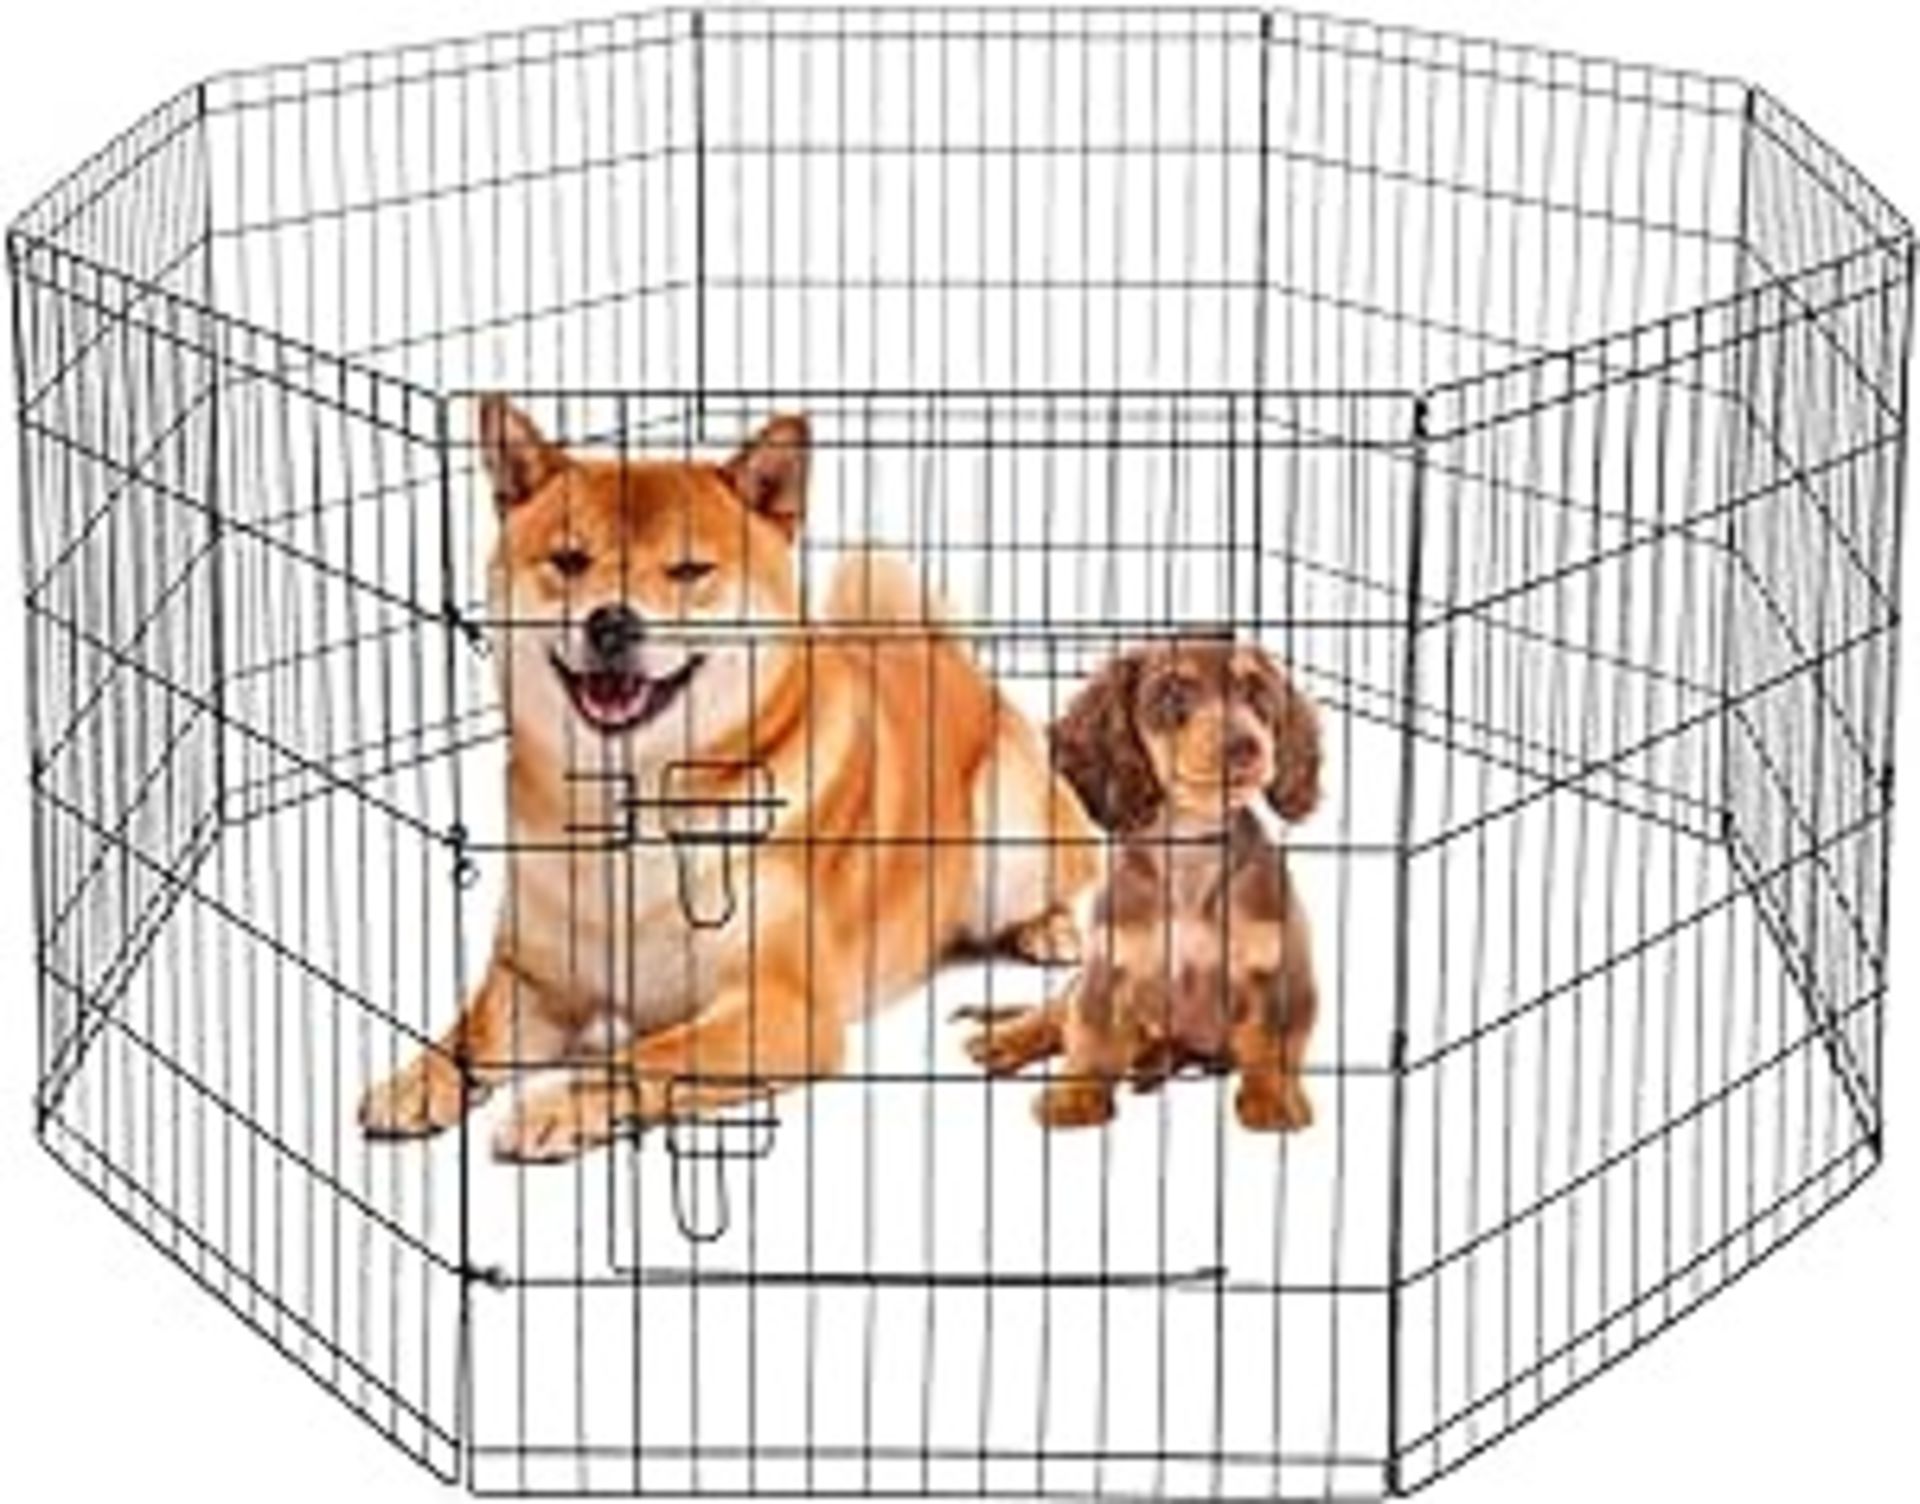 8 Panel Puppy-Cat-Rabbit Foldable Playpen for Indoor/Outdoor Panel approx 50x76cm (LOCATION H/S 5.